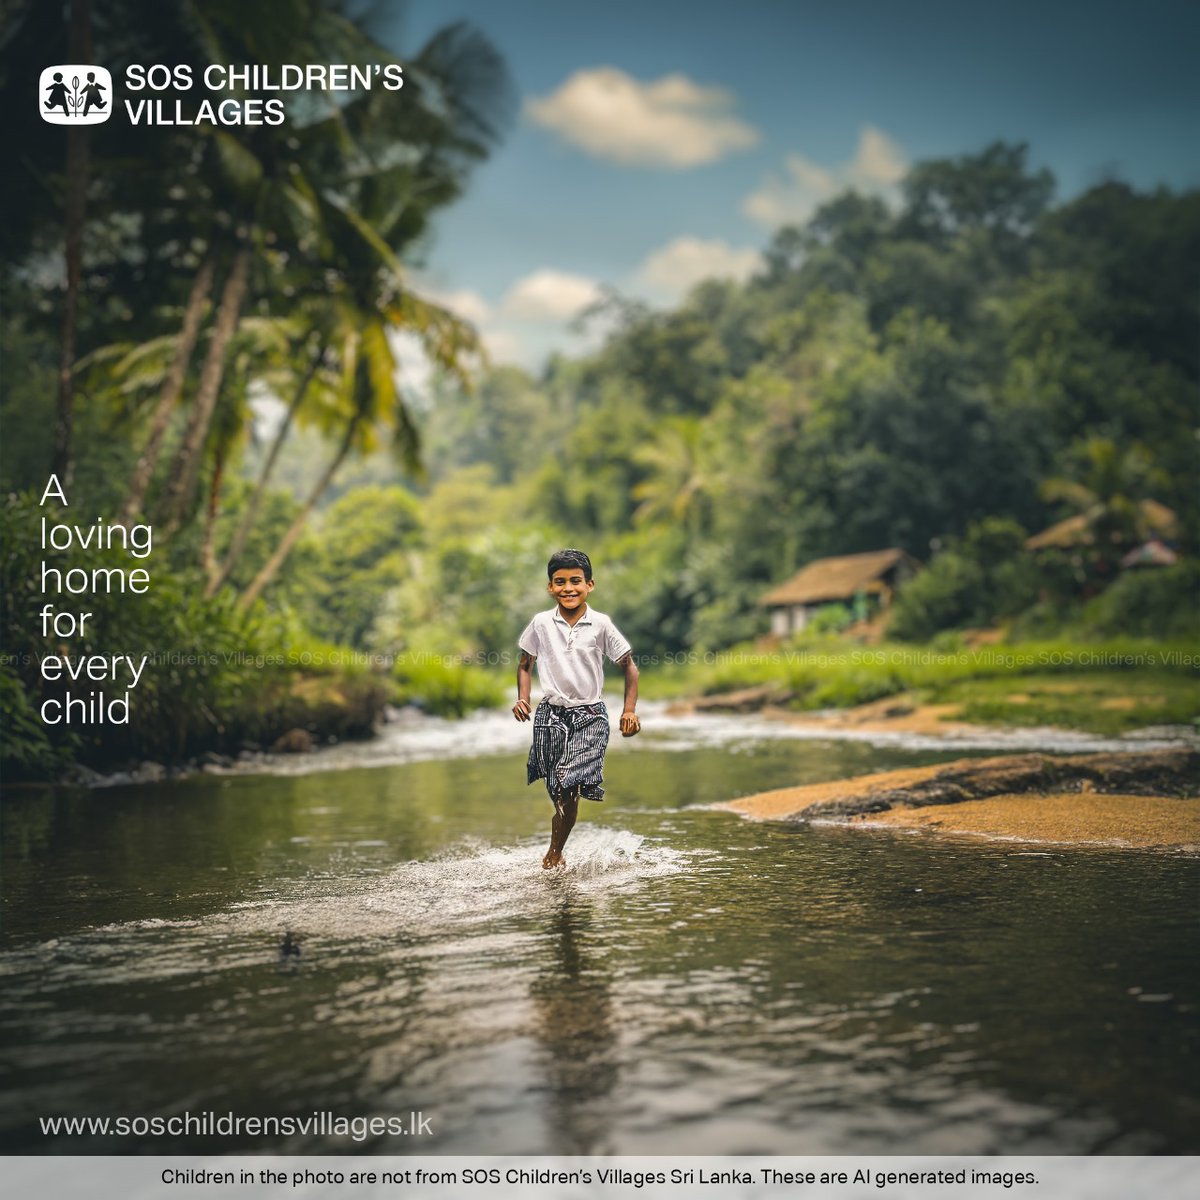 “History will judge us by the difference we make in the everyday lives of children.” ― Nelson Mandela
soschildrensvillages.lk/ways-to-support
#parentingtips #ChildrenFirst #HopeForTomorrow  #ChildhoodJoy #EqualOpportunities #DreamsTakeFlight #soschildrensvillages #SOSFamily #SriLanka #lka